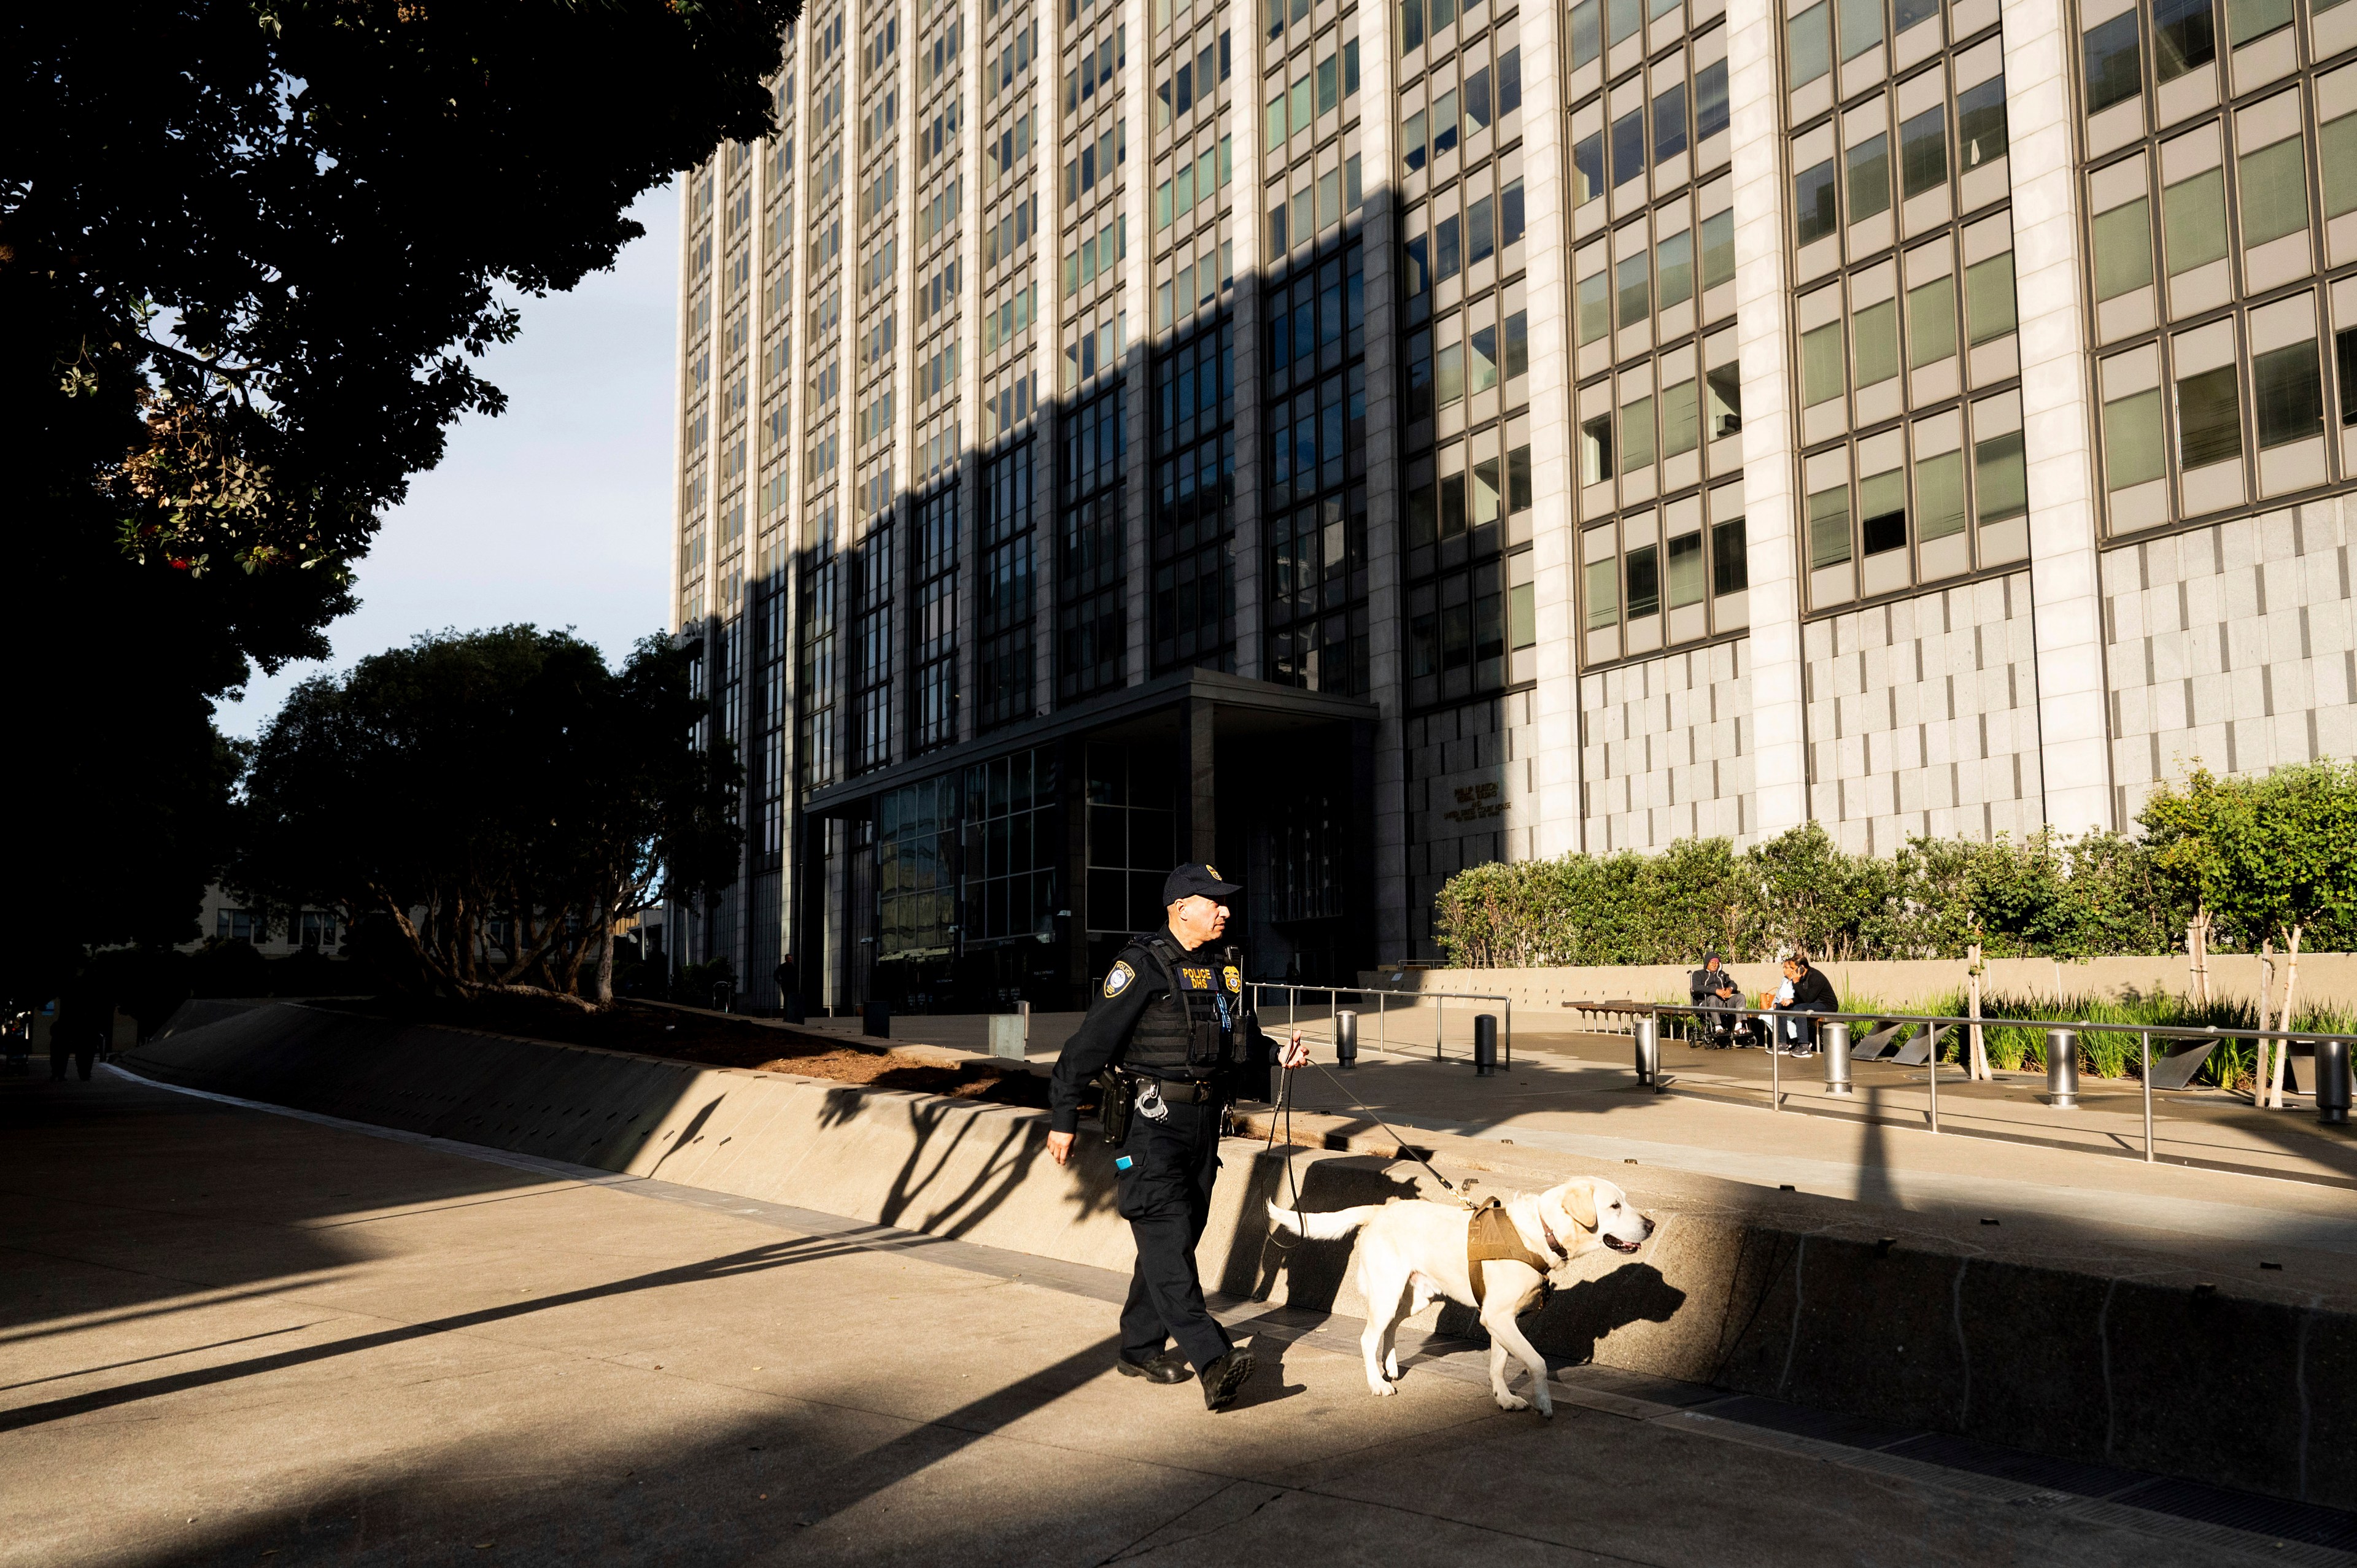 A police officer walks around the exterior a federal building with a dog.